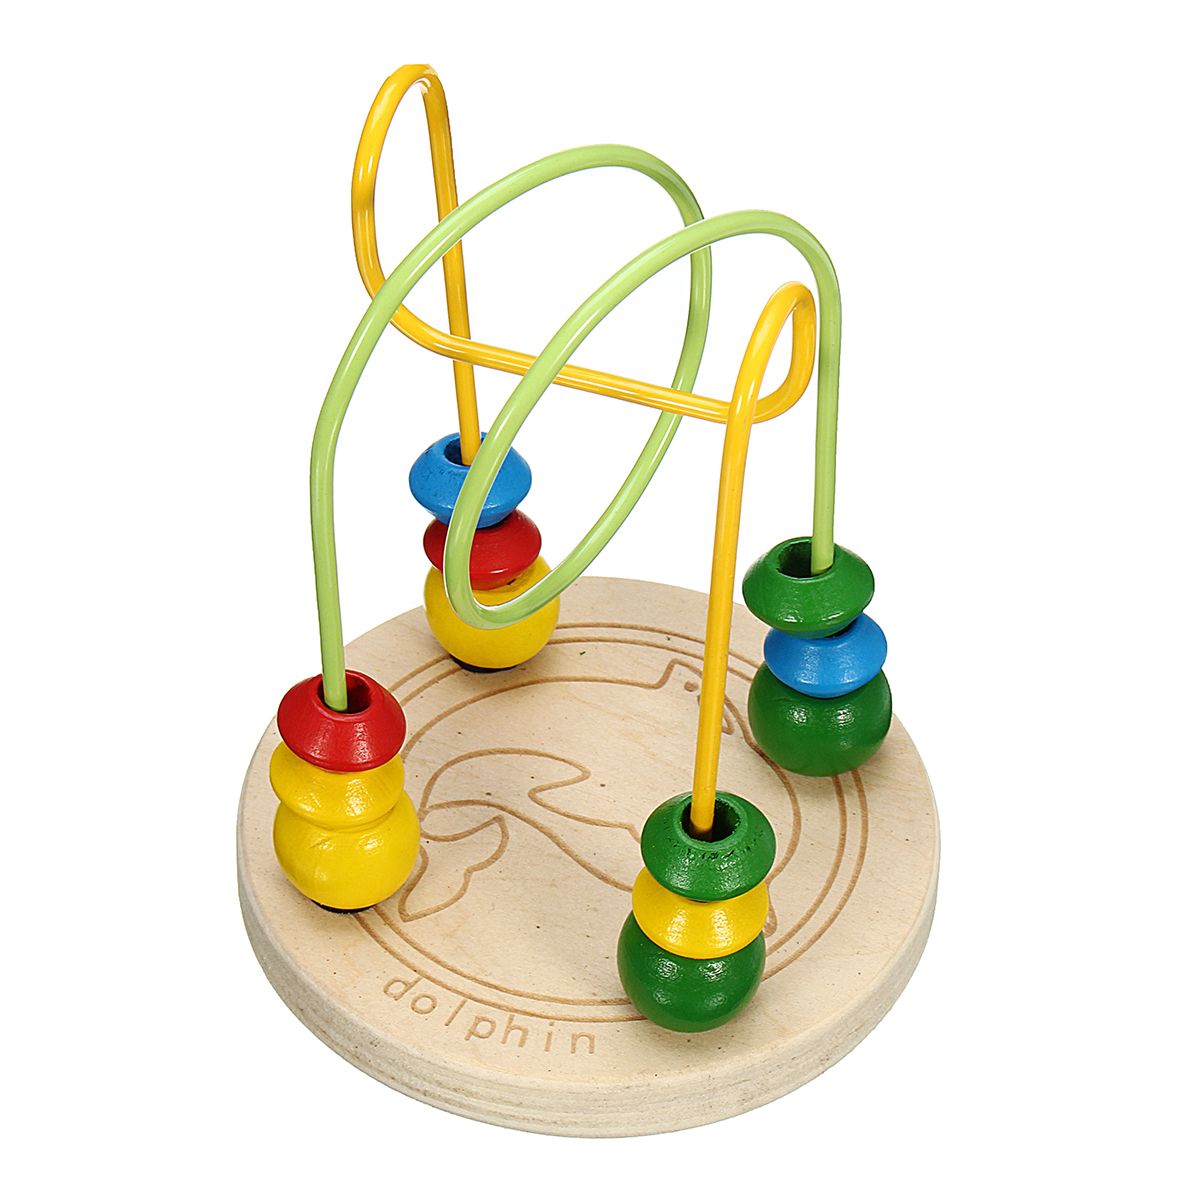 Cartoon-Animal-Mini-Round-Beads-Early-Education-Puzzle-Infants-Wooden-Toys-1470380